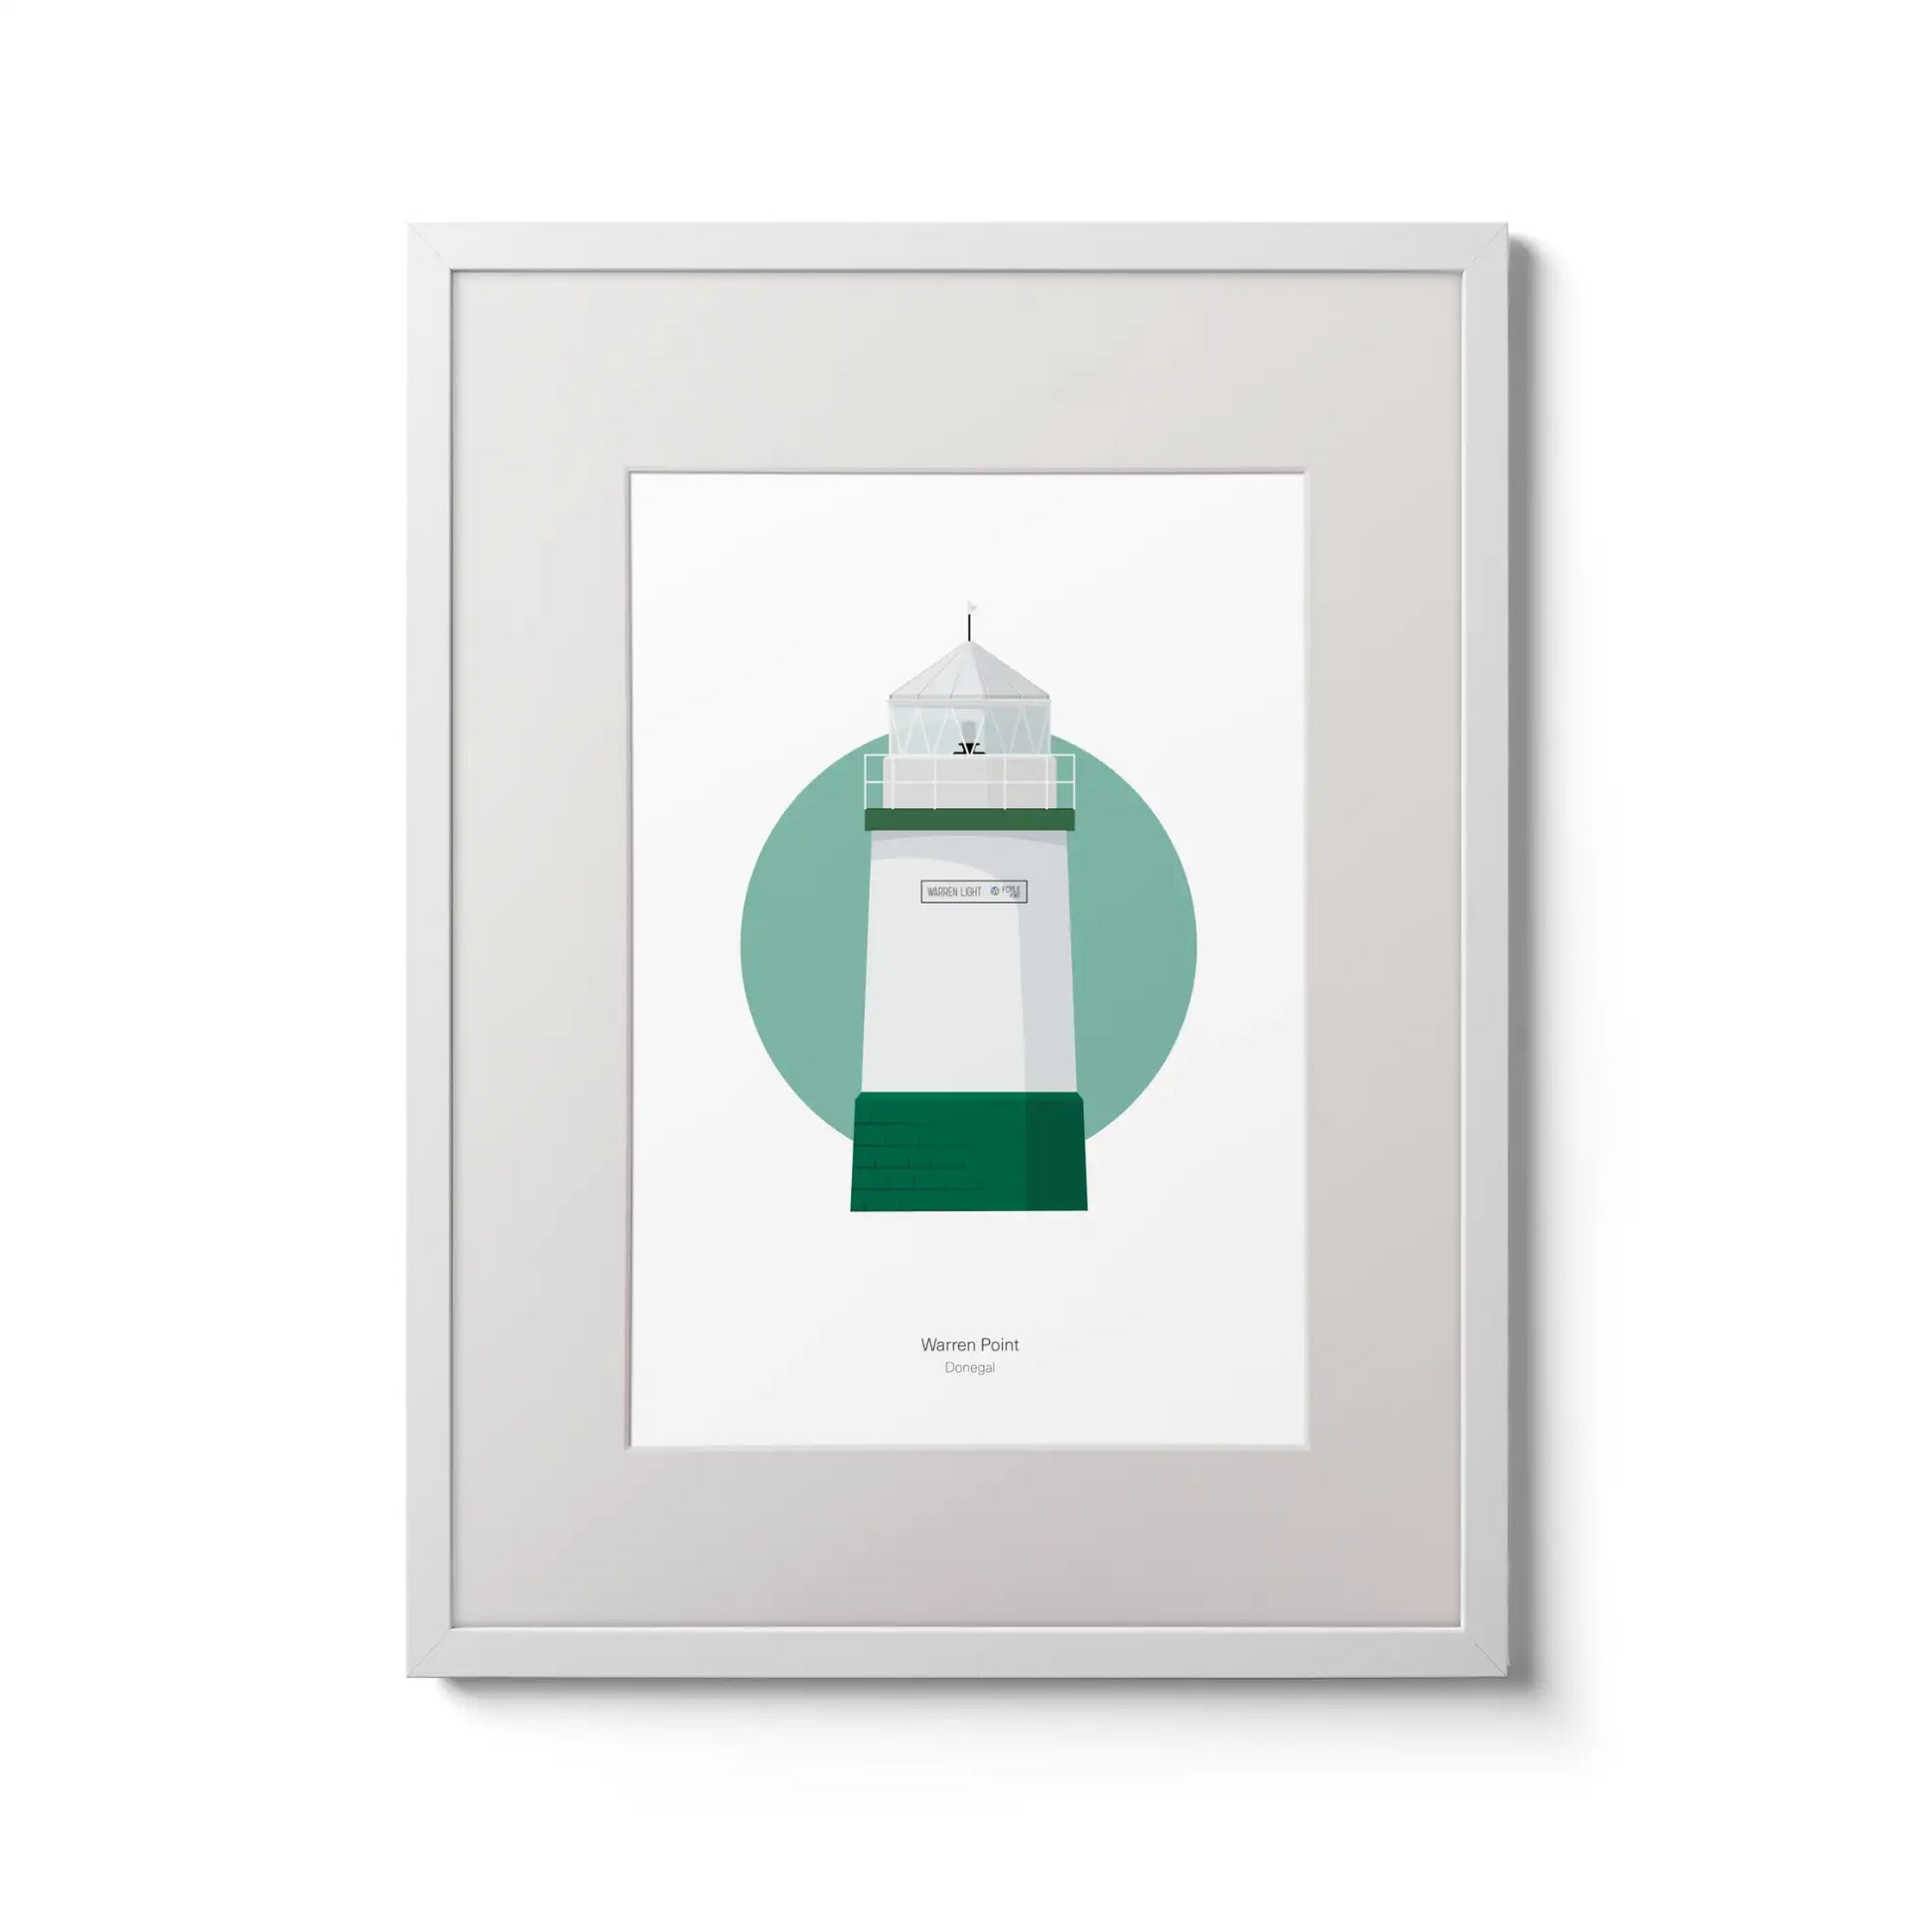 Contemporary wall art decor of Warren Point lighthouse on a white background inside light blue square,  in a white frame measuring 30x40cm.